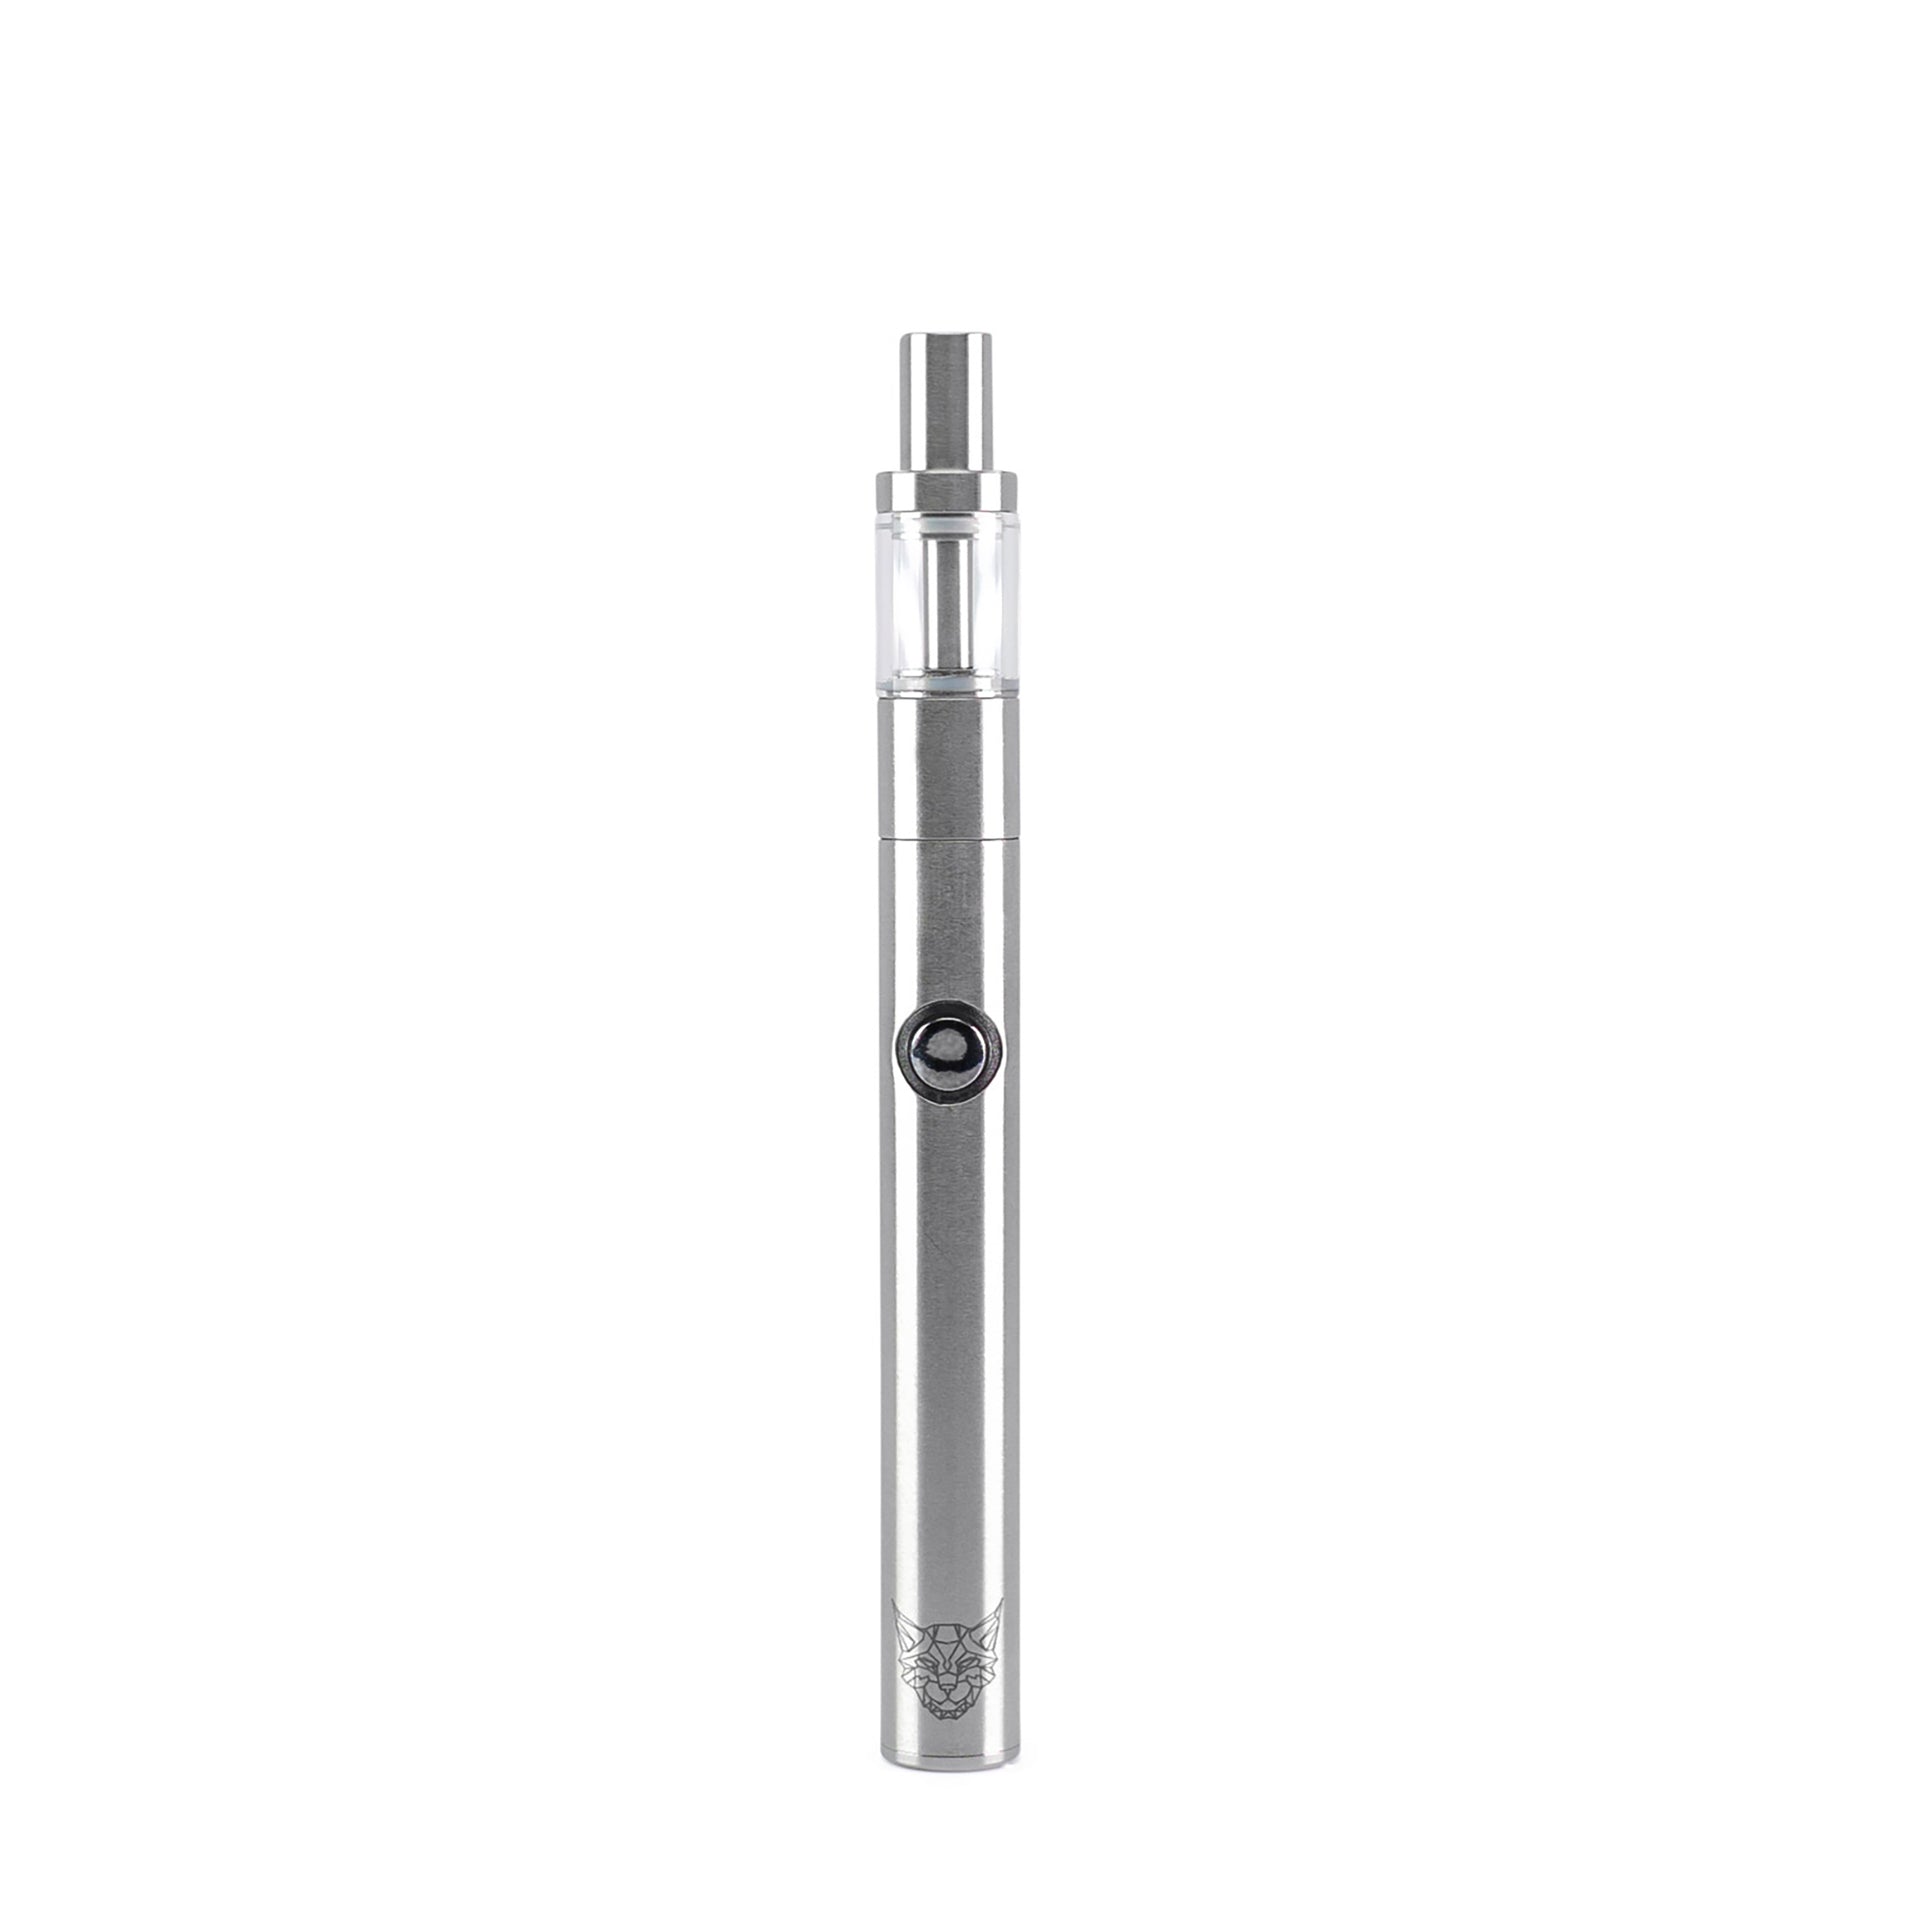 LINX Hermes 3 Oil Cartridge Vape - 420 Science - The most trusted online smoke shop.